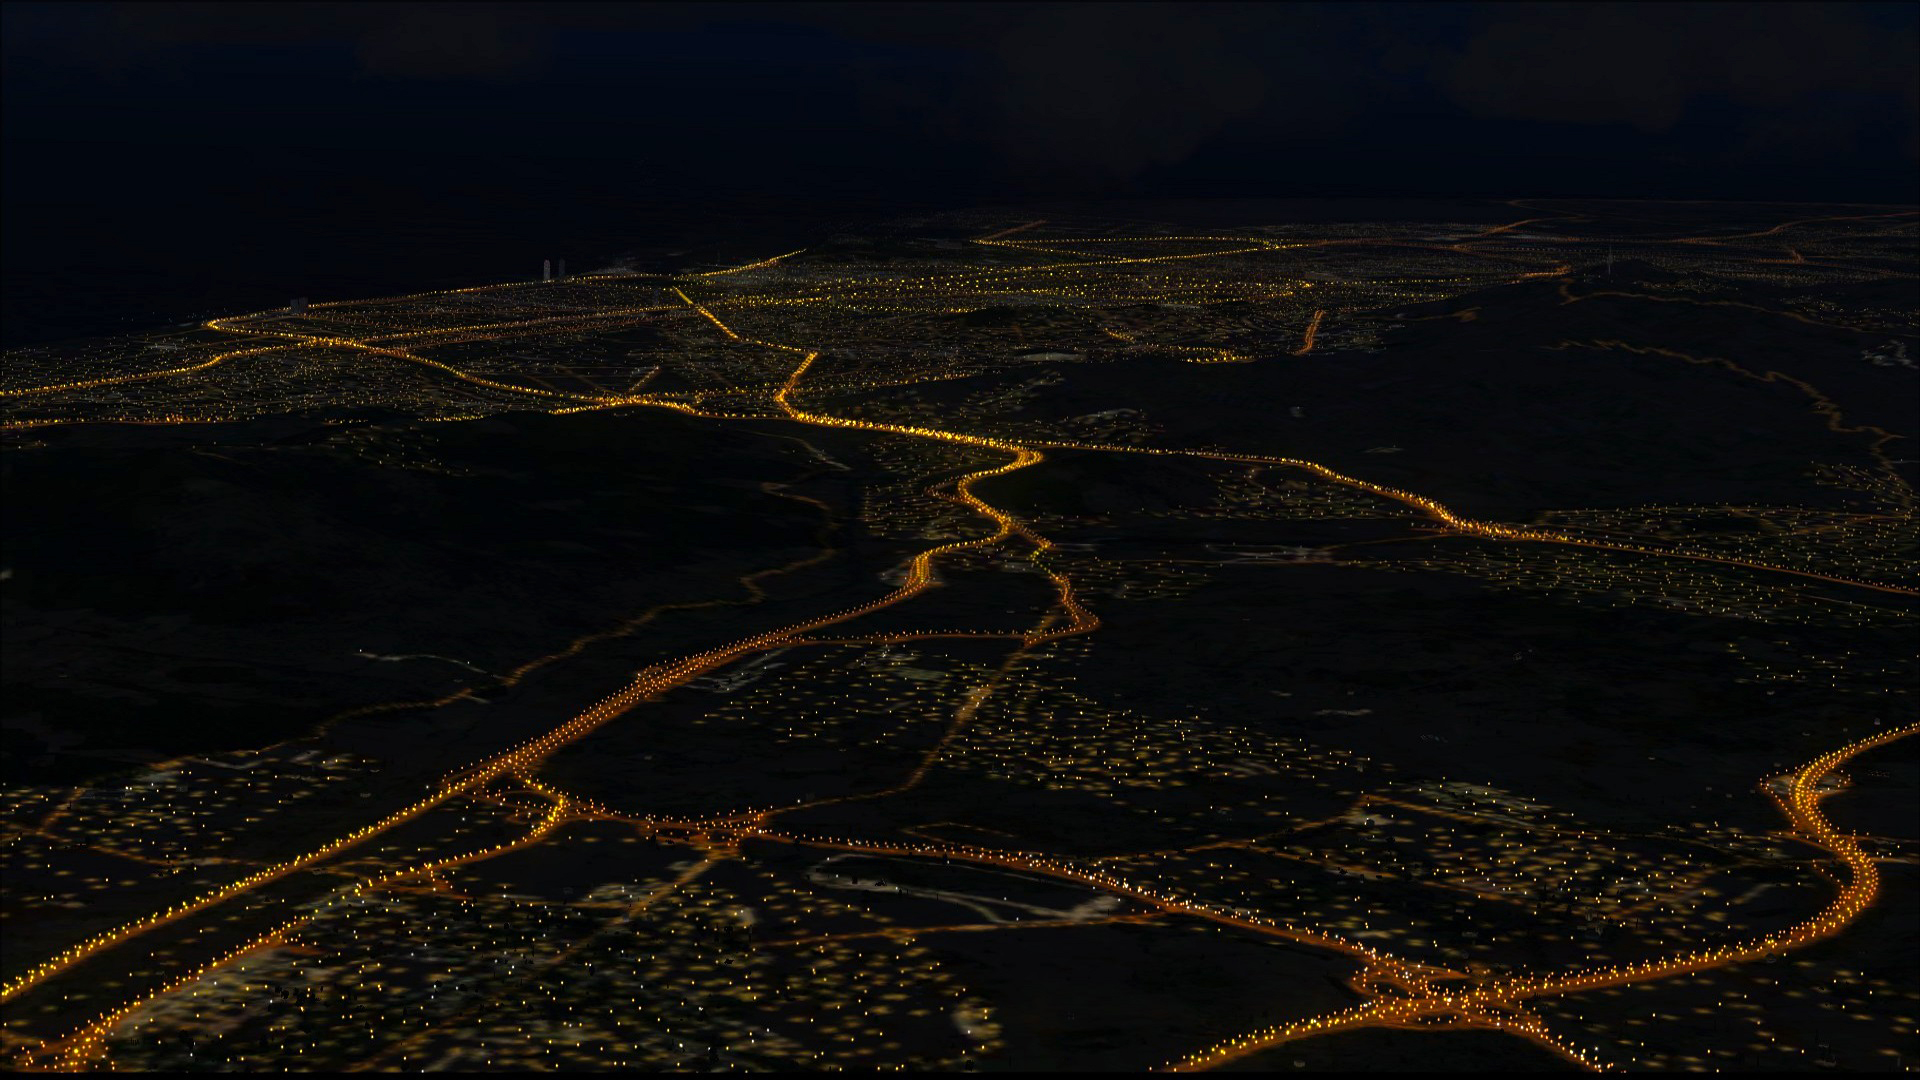 Save 50% on FSX Steam Edition: Night Environment: Spain Add-On on Steam